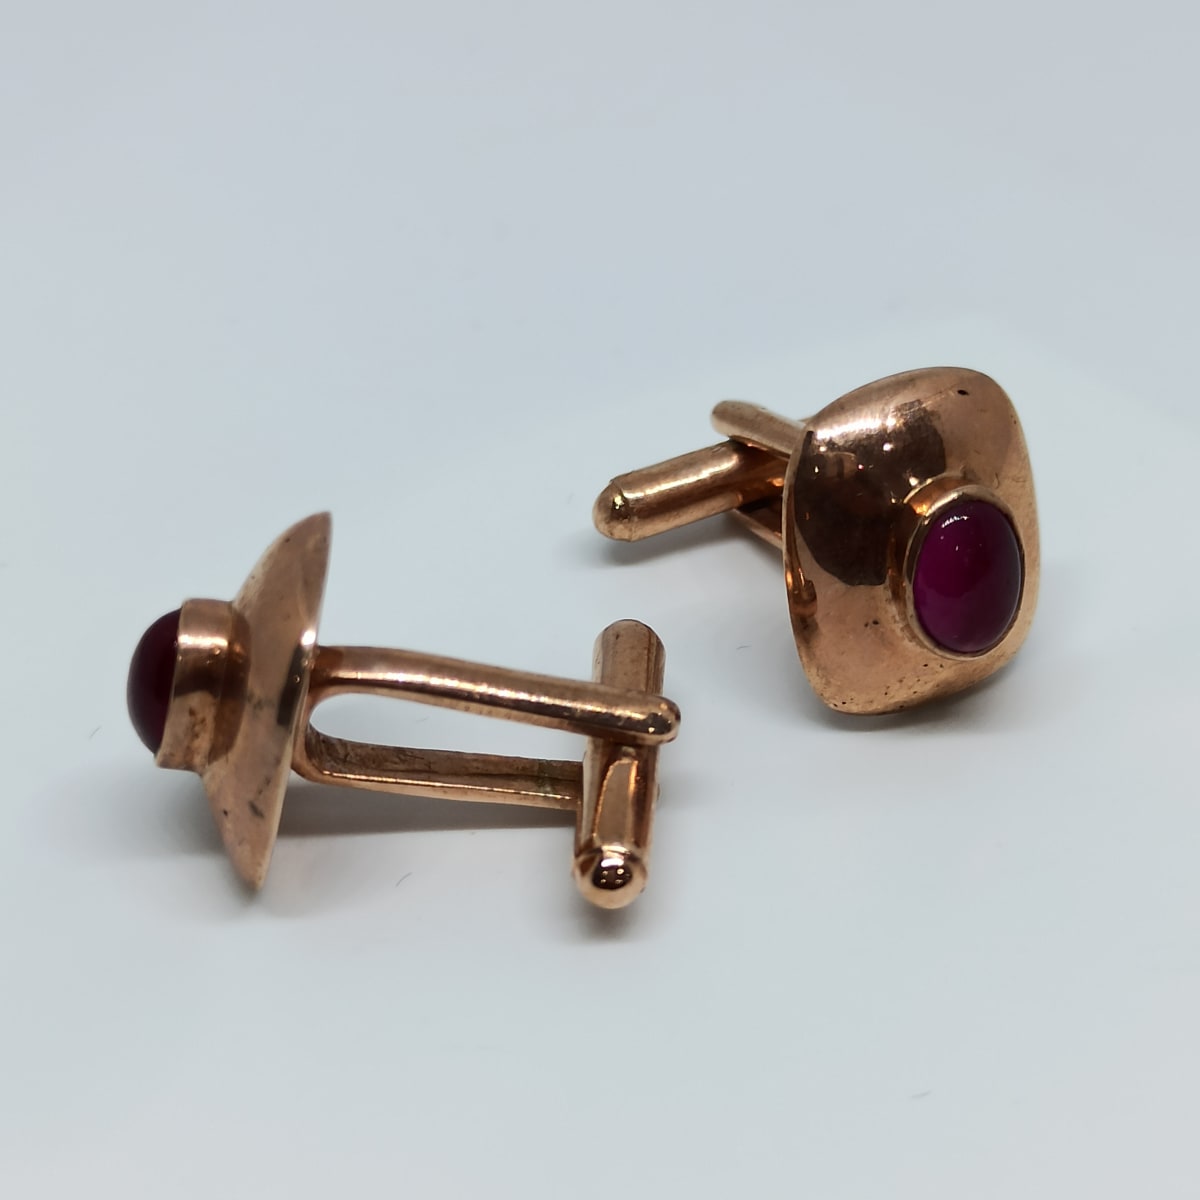 Buy Silver Cuff Links In Rose Gold Color Online | Prakash Jewellers ...